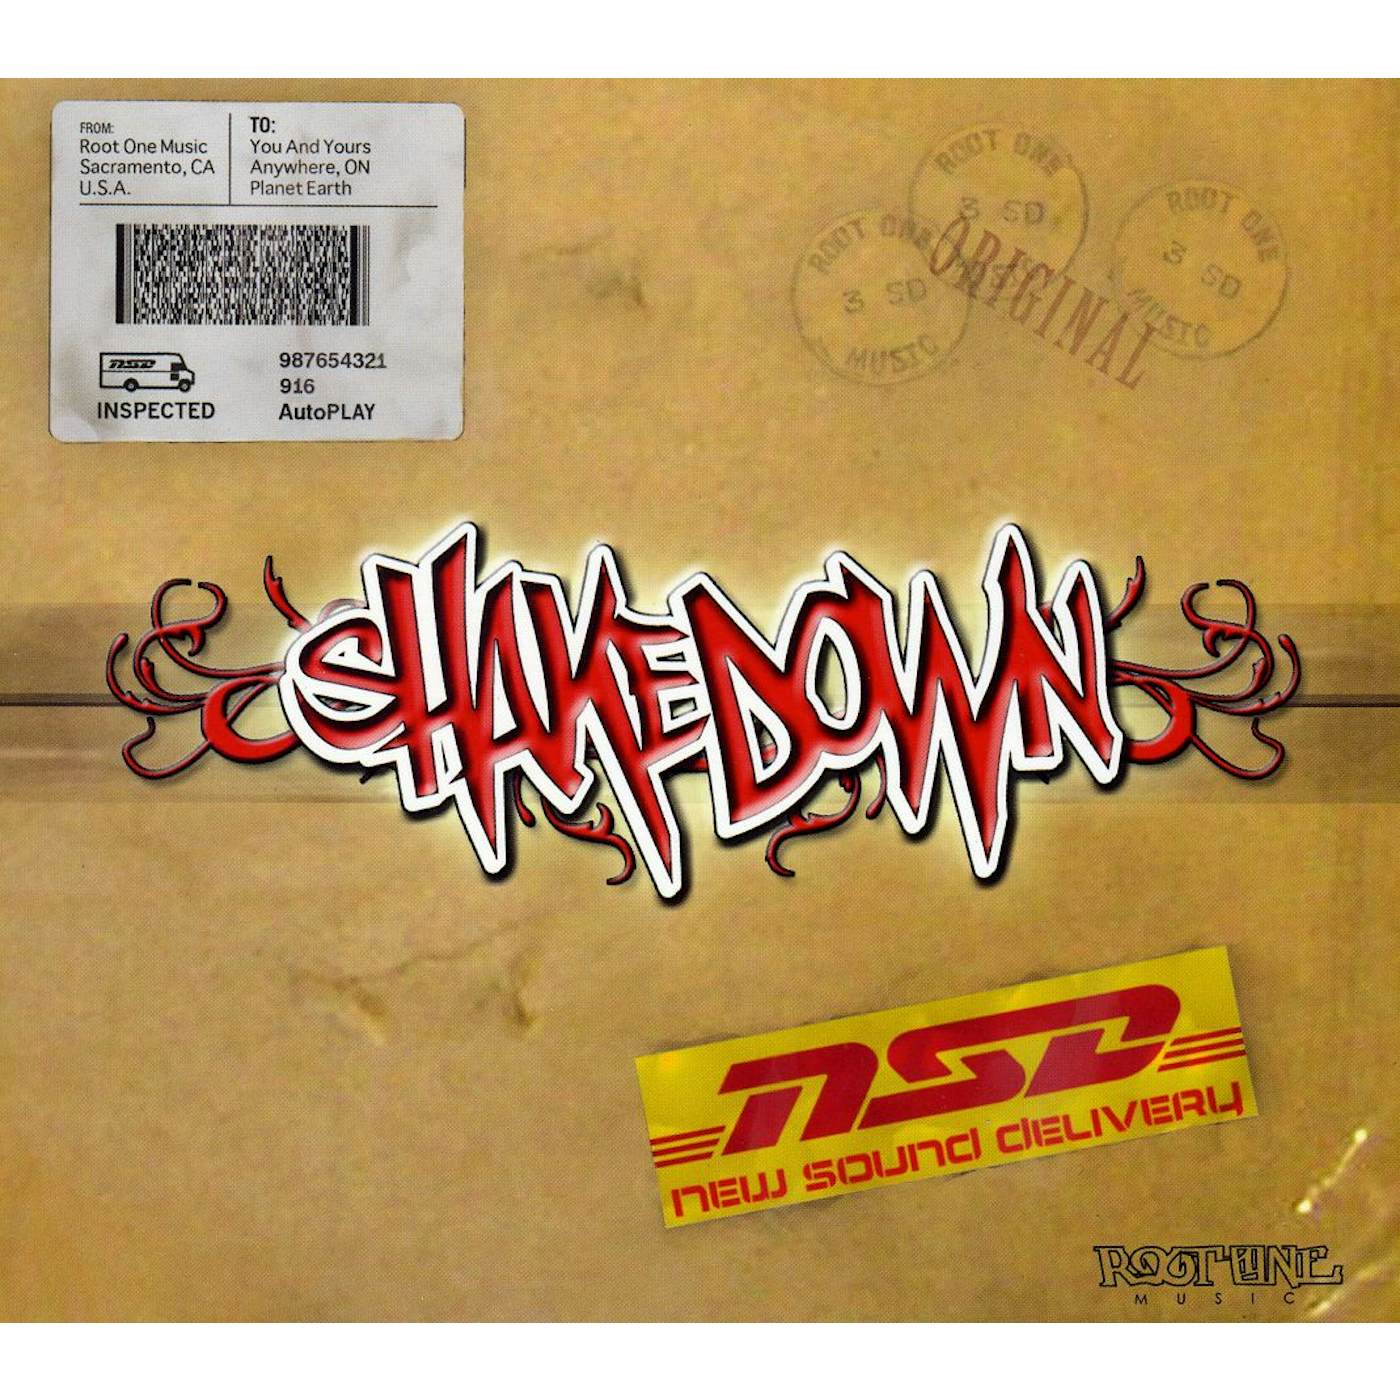 Shakedown NEW SOUND DELIVERY CD